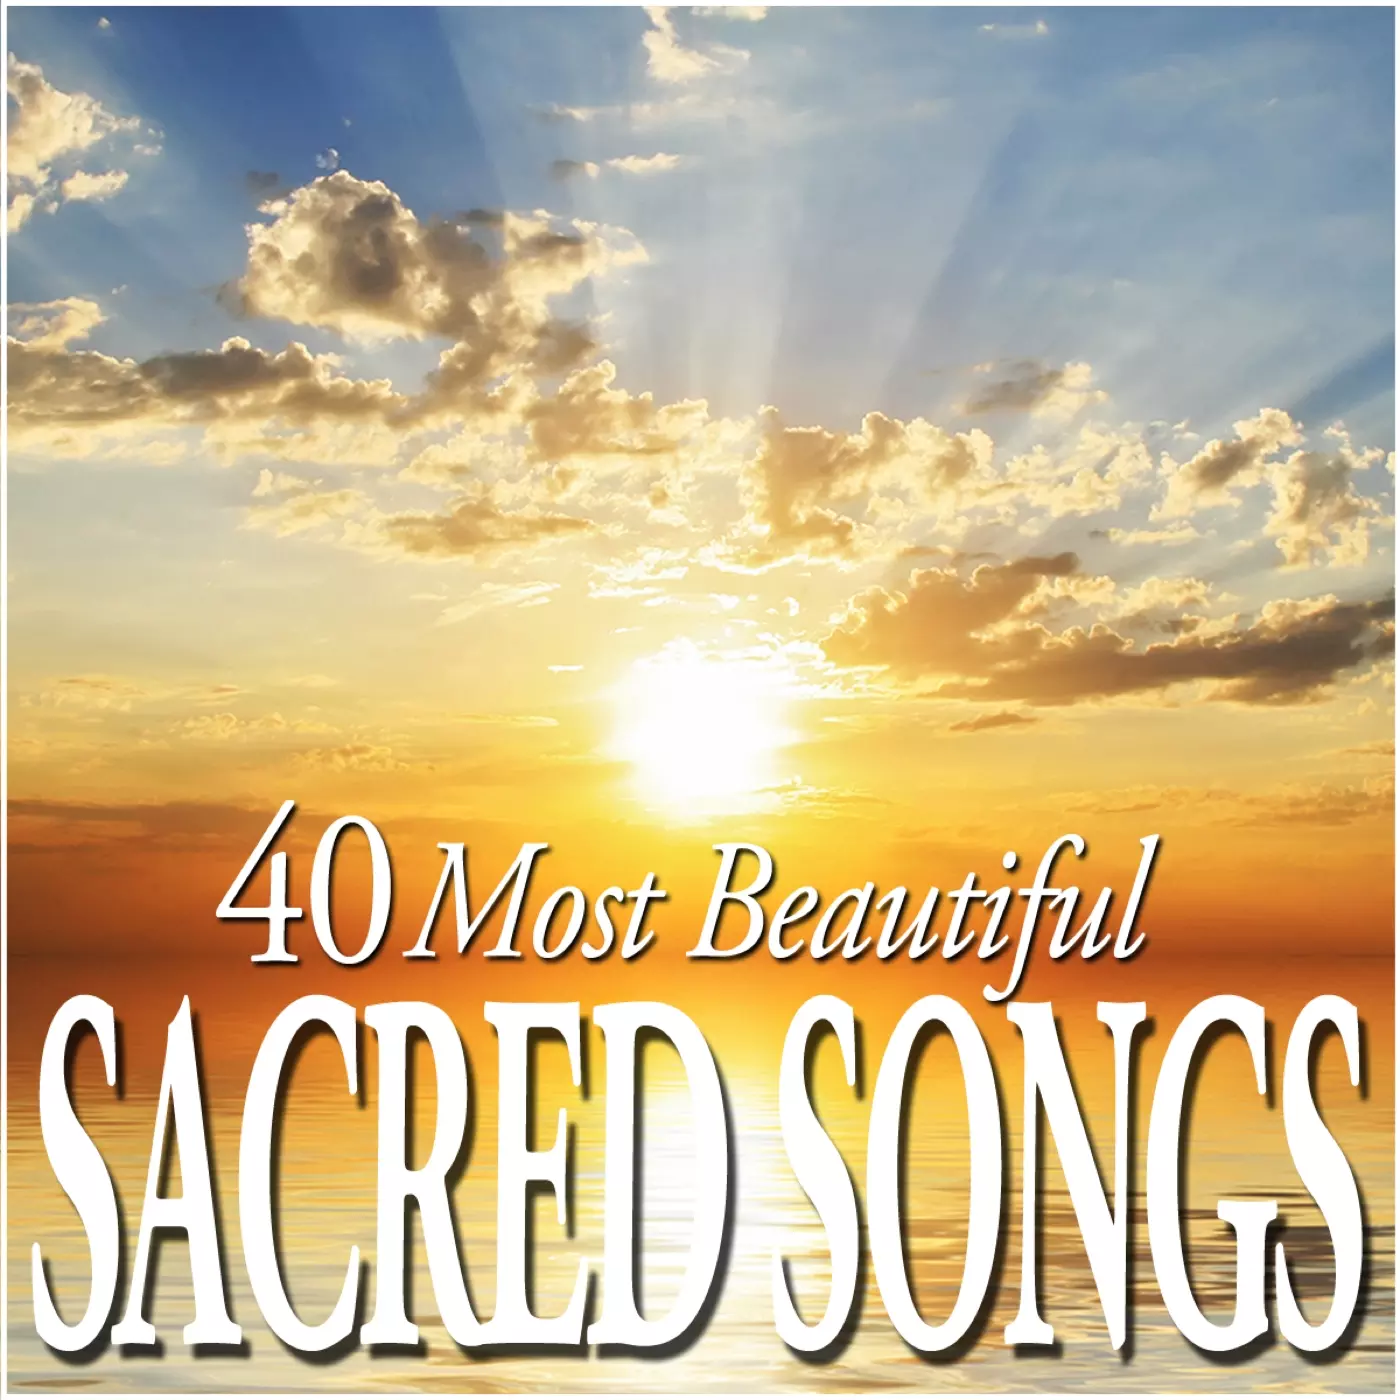 40 Most Beautiful Sacred Songs